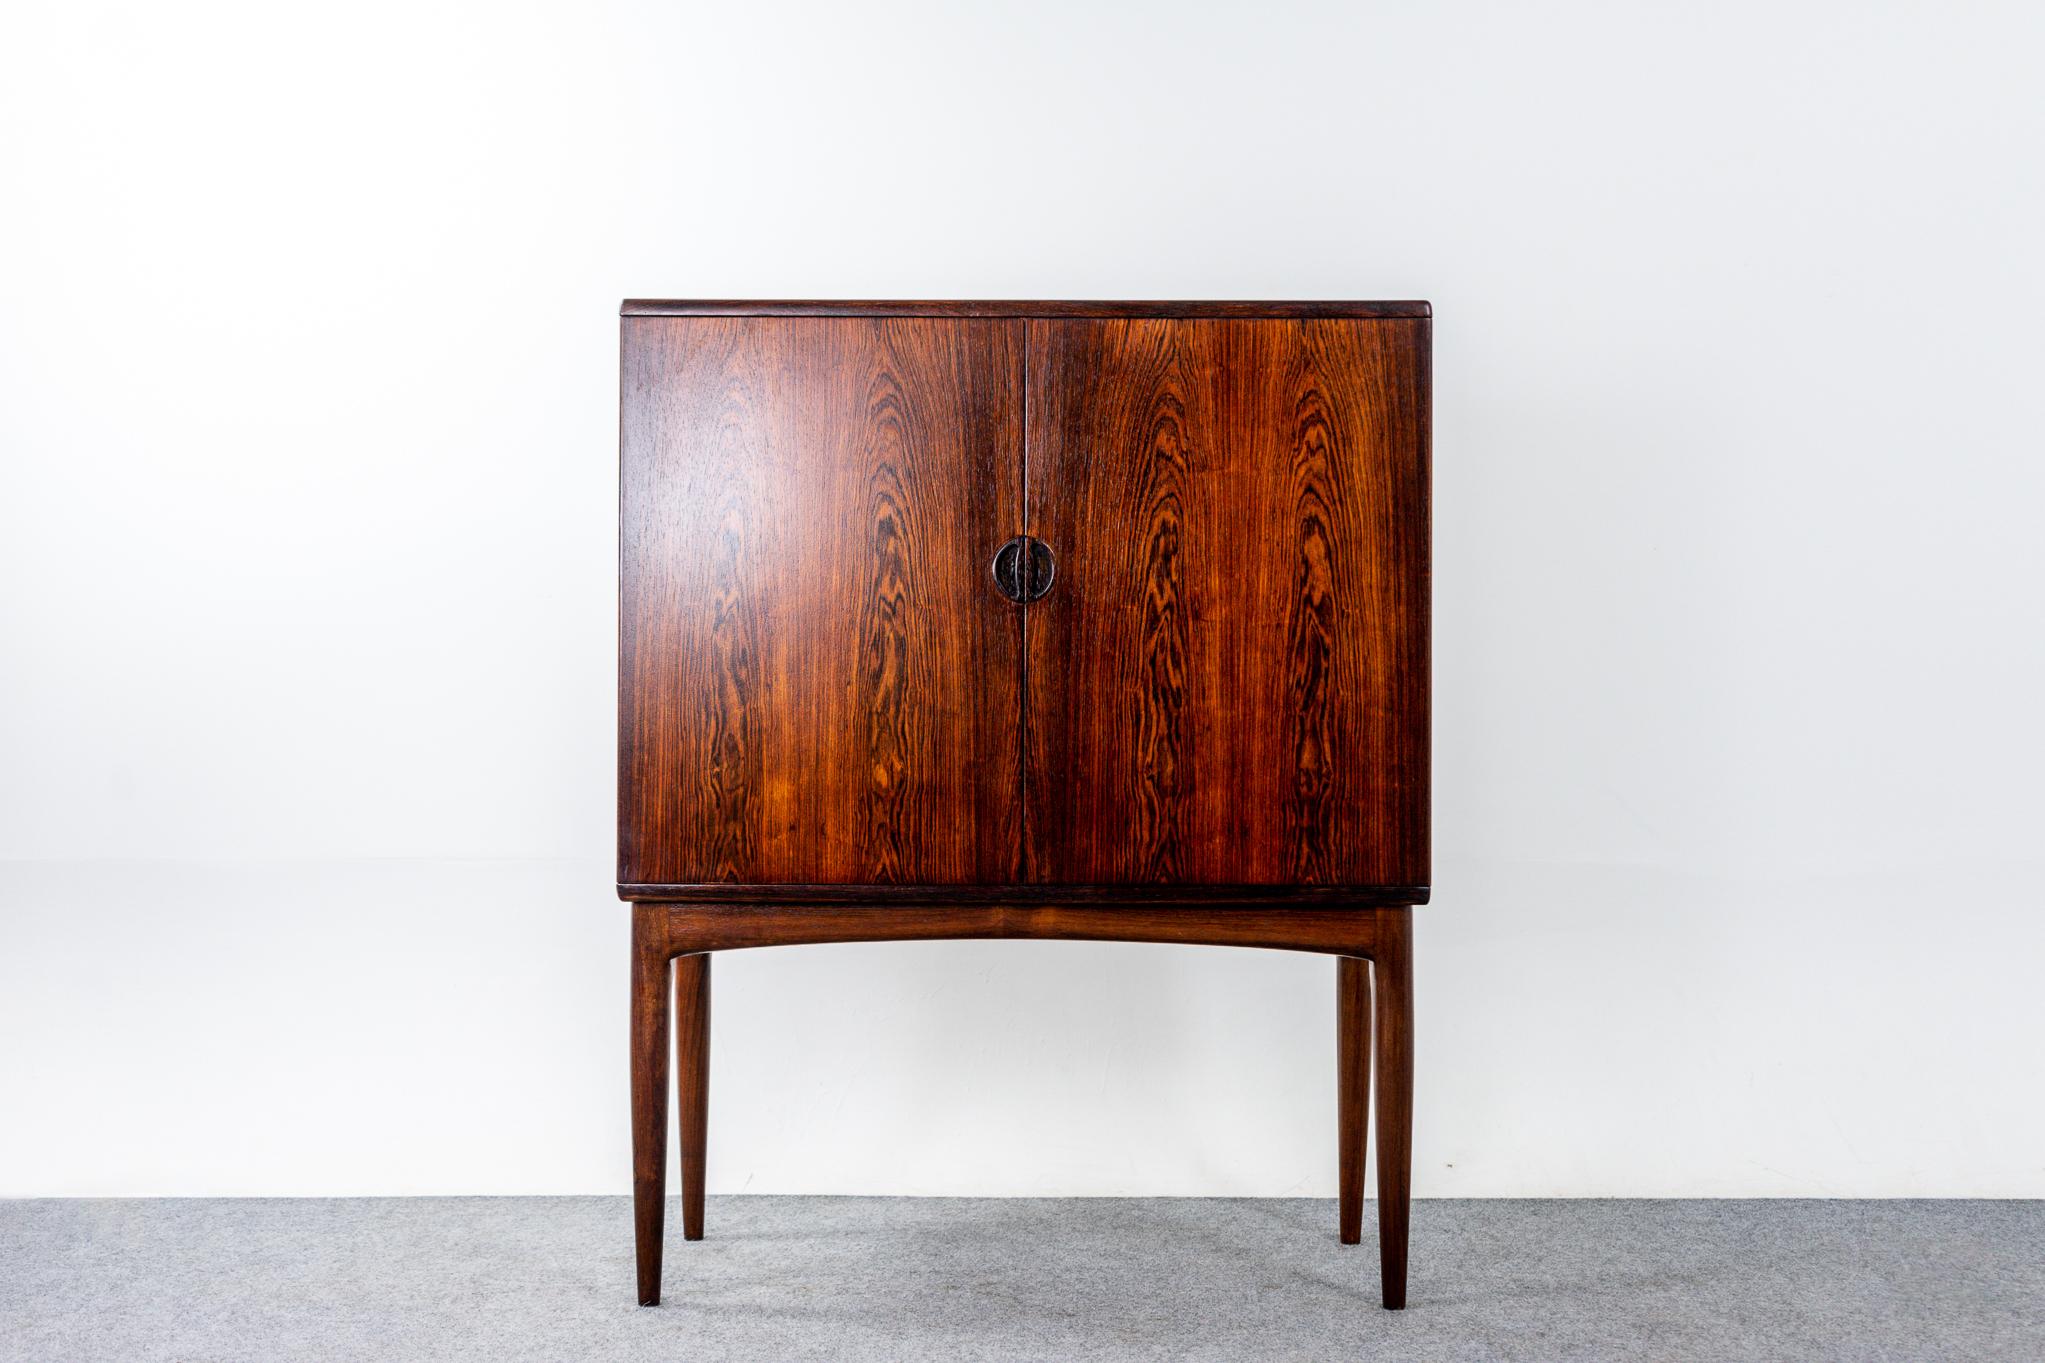 Rosewood Danish cabinet/bar, circa 1960's. The ultimate drink serving station with exquisite grain patterning. Book matched double doors open to reveal fitted interior with mirror and interior light that triggers when opened. Two rows of glass